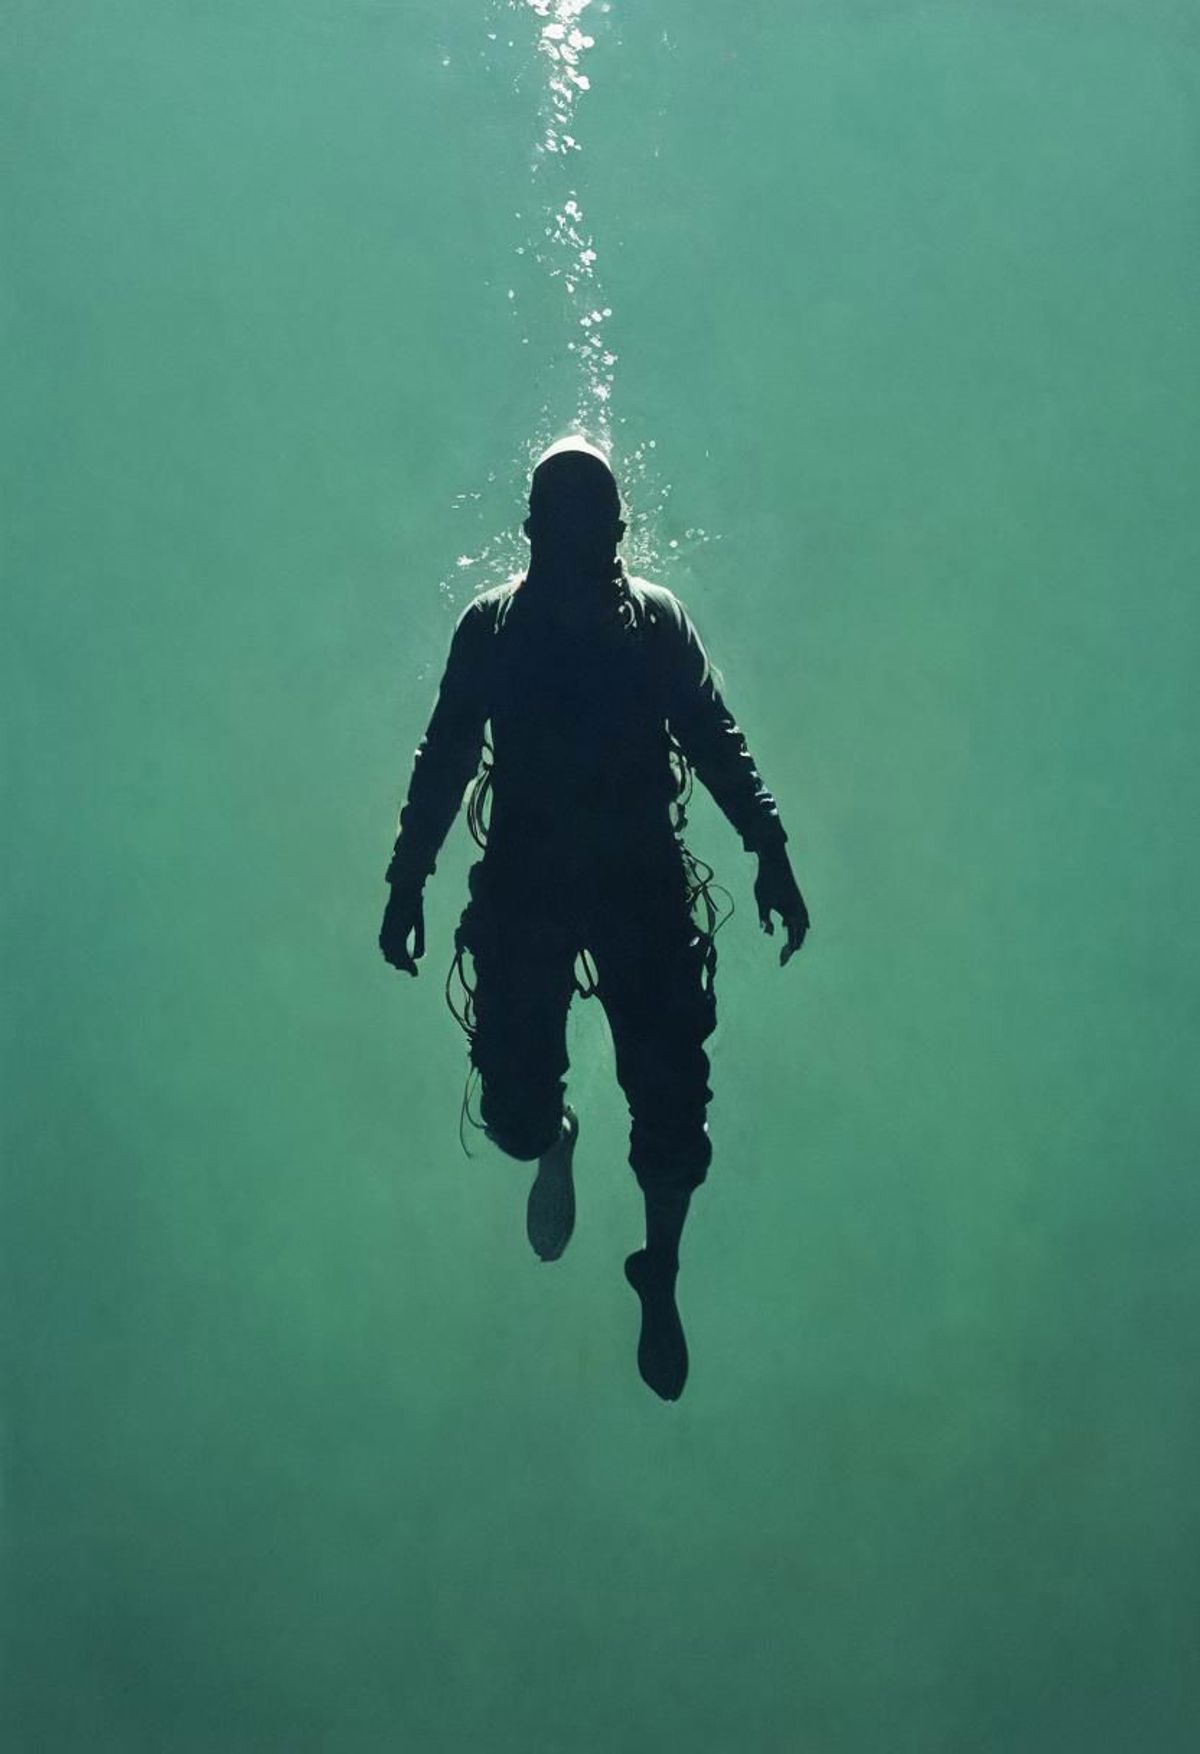 A Diver Swimming Underwater in a Black Wetsuit